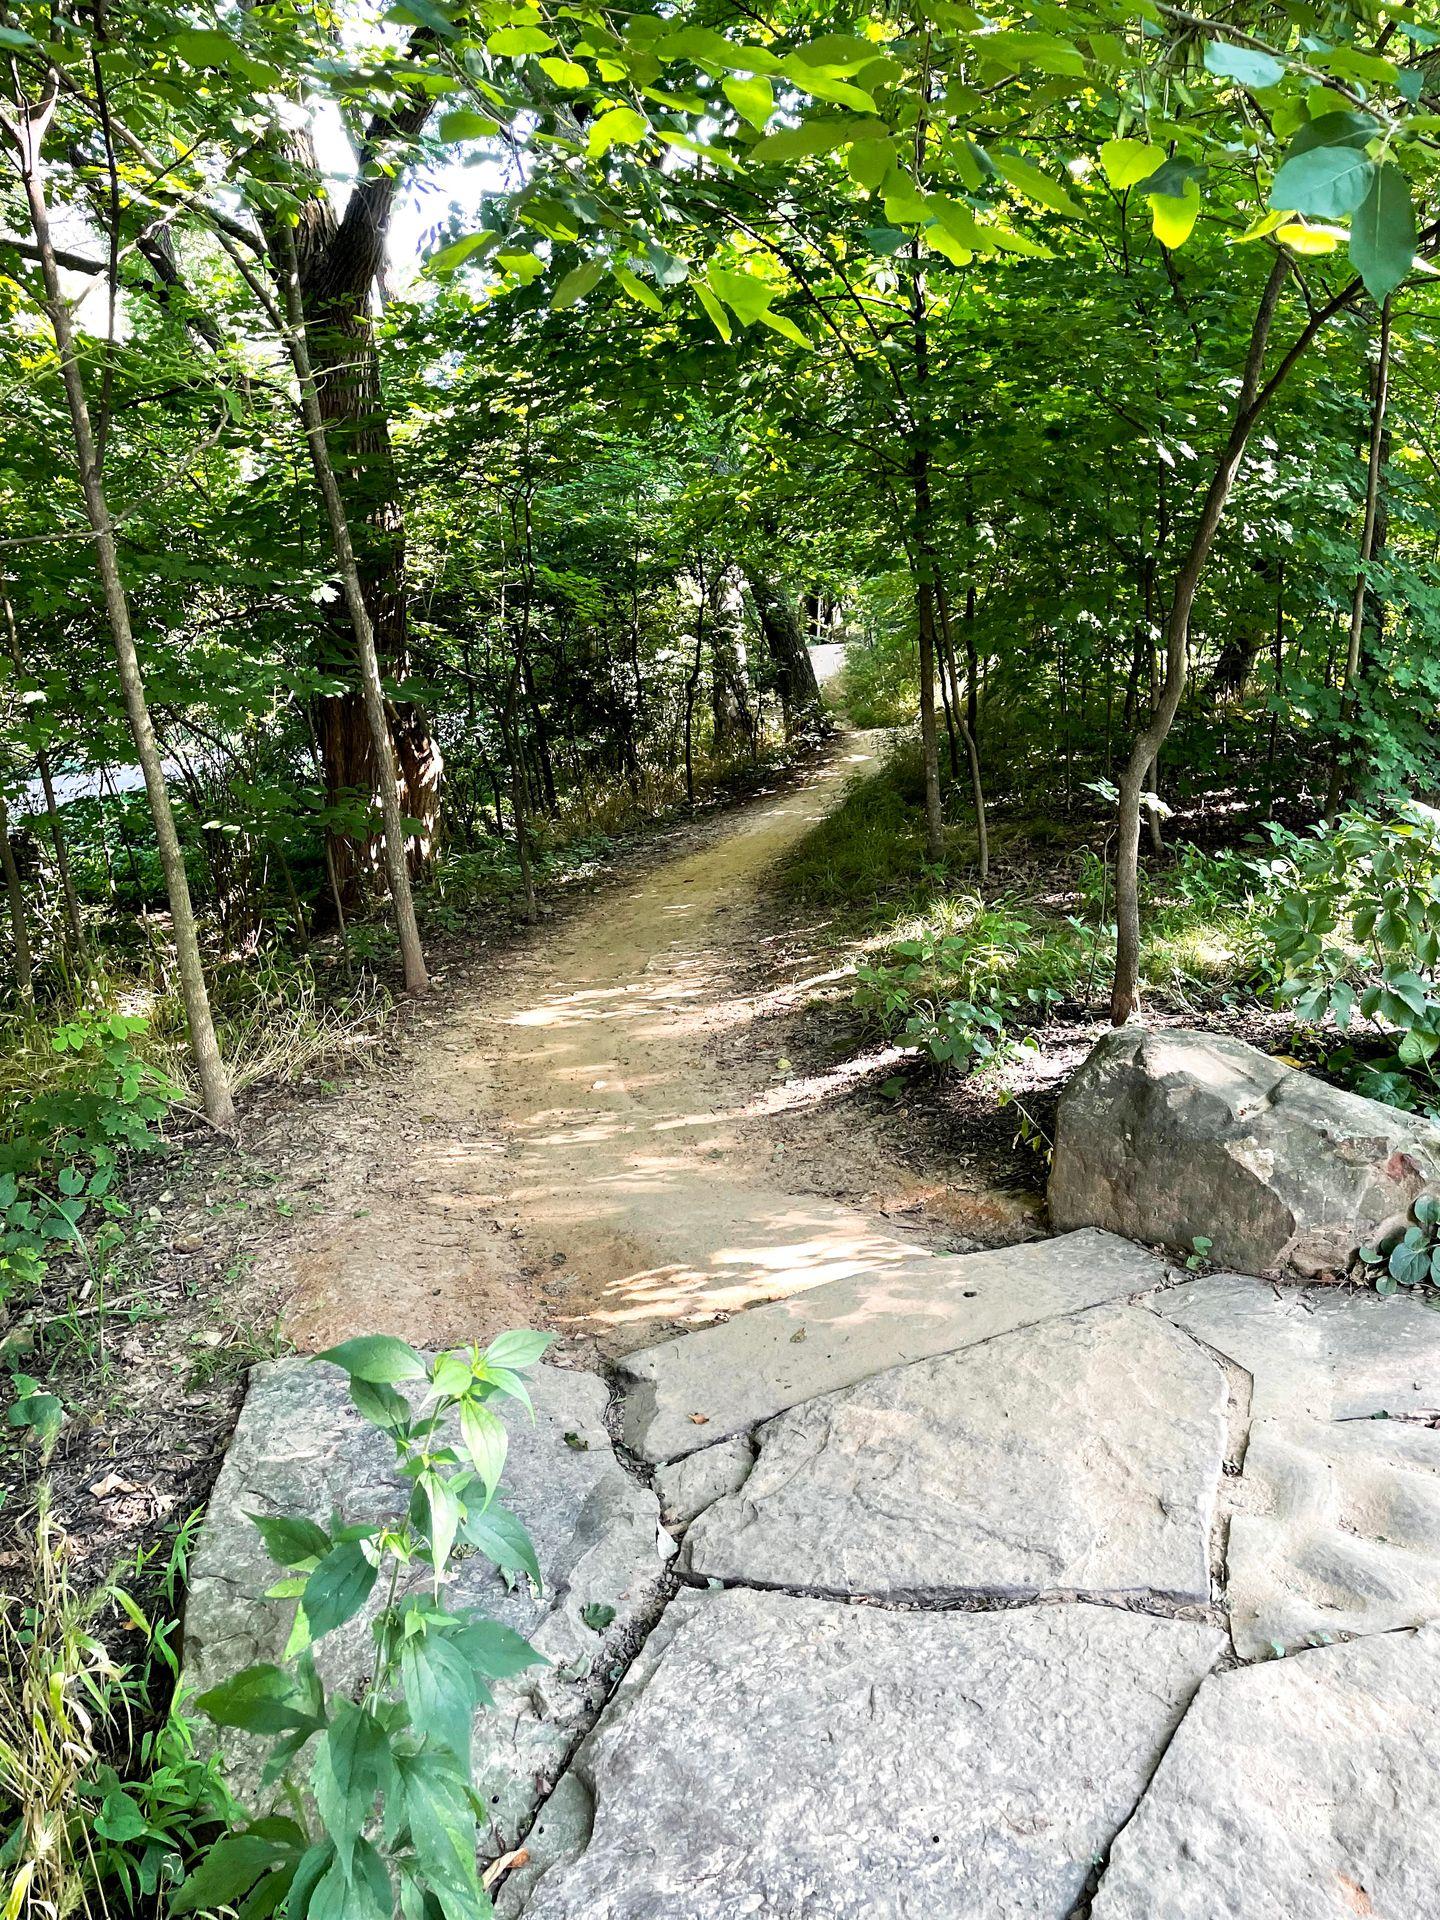 A dirt bike path leading into the woods.